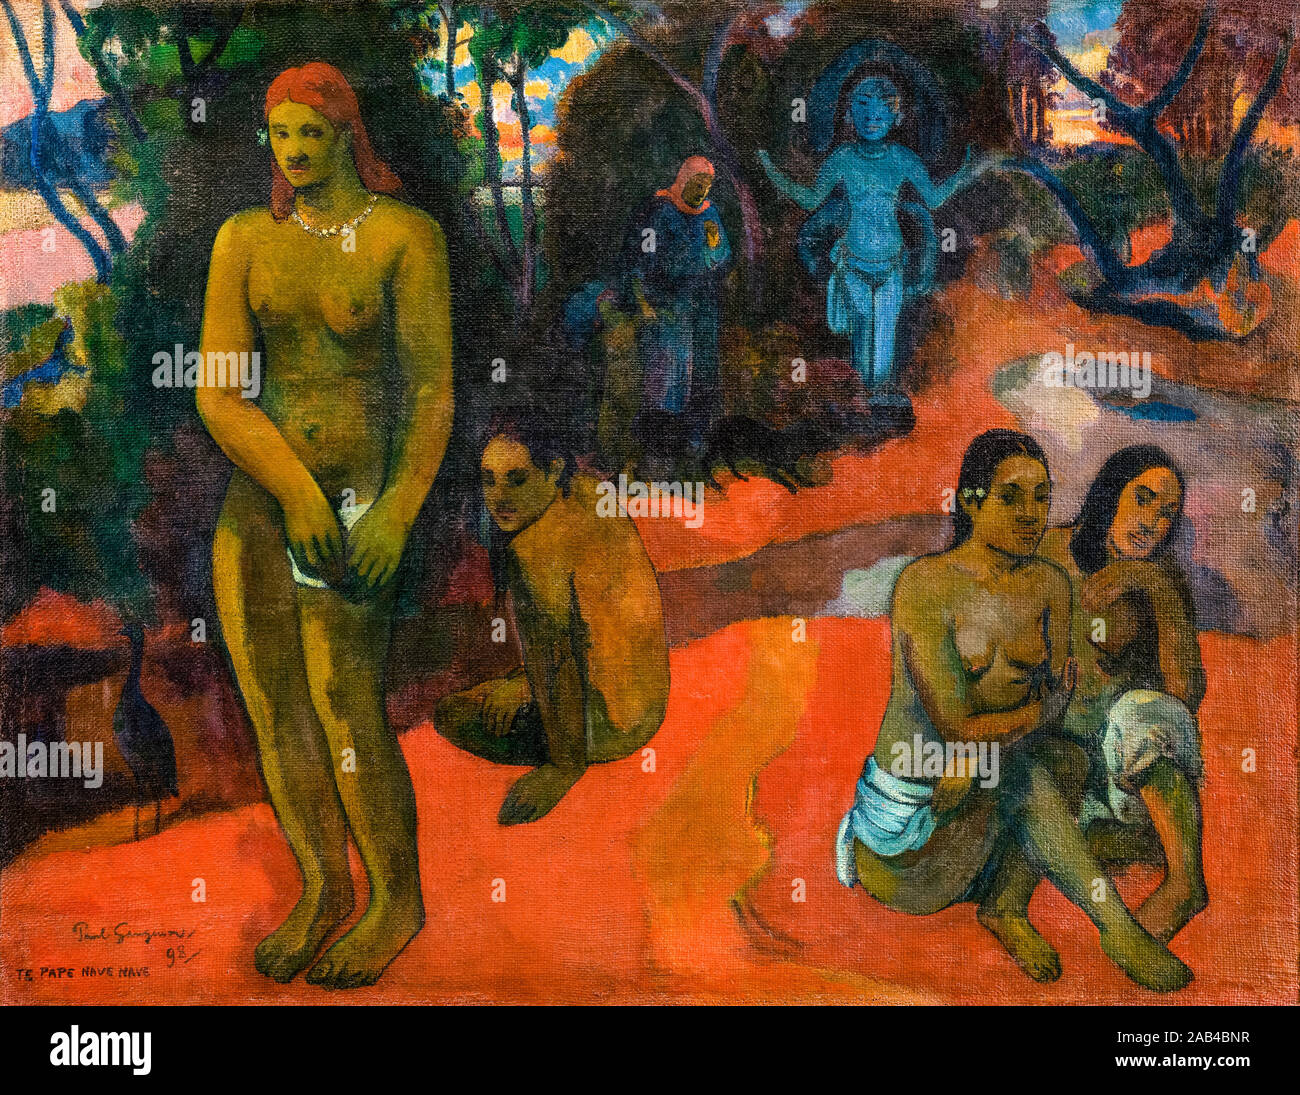 Paul Gauguin, Te Pape Nave Nave, (Delectable Waters), painting, 1898 Stock Photo